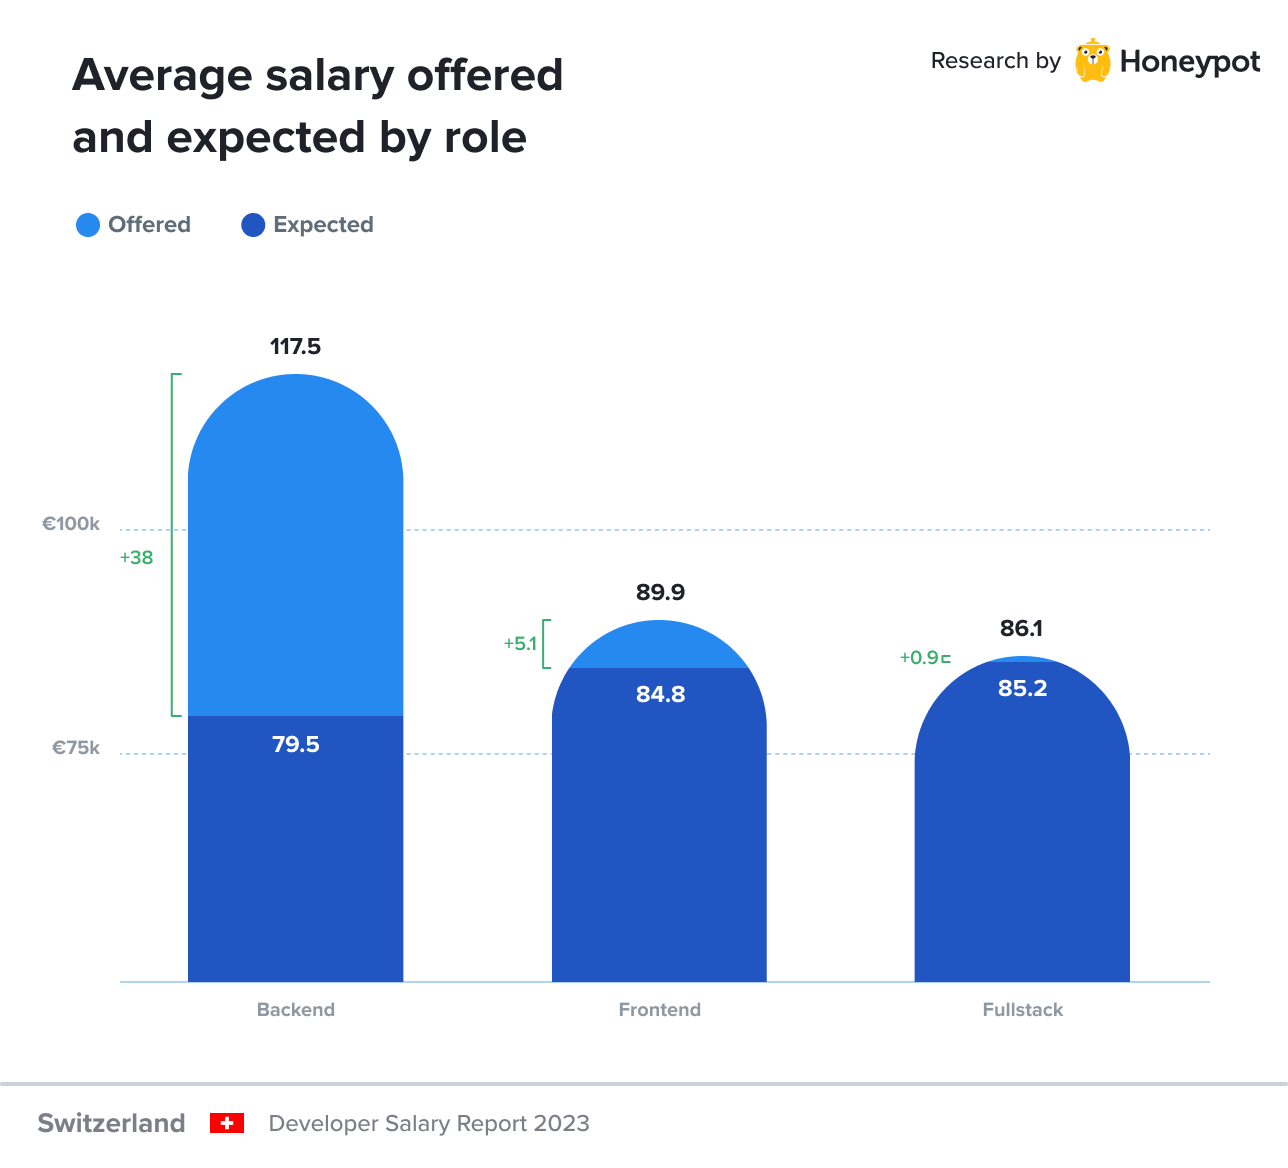 Switzerland – Average offered vs expected salary by role